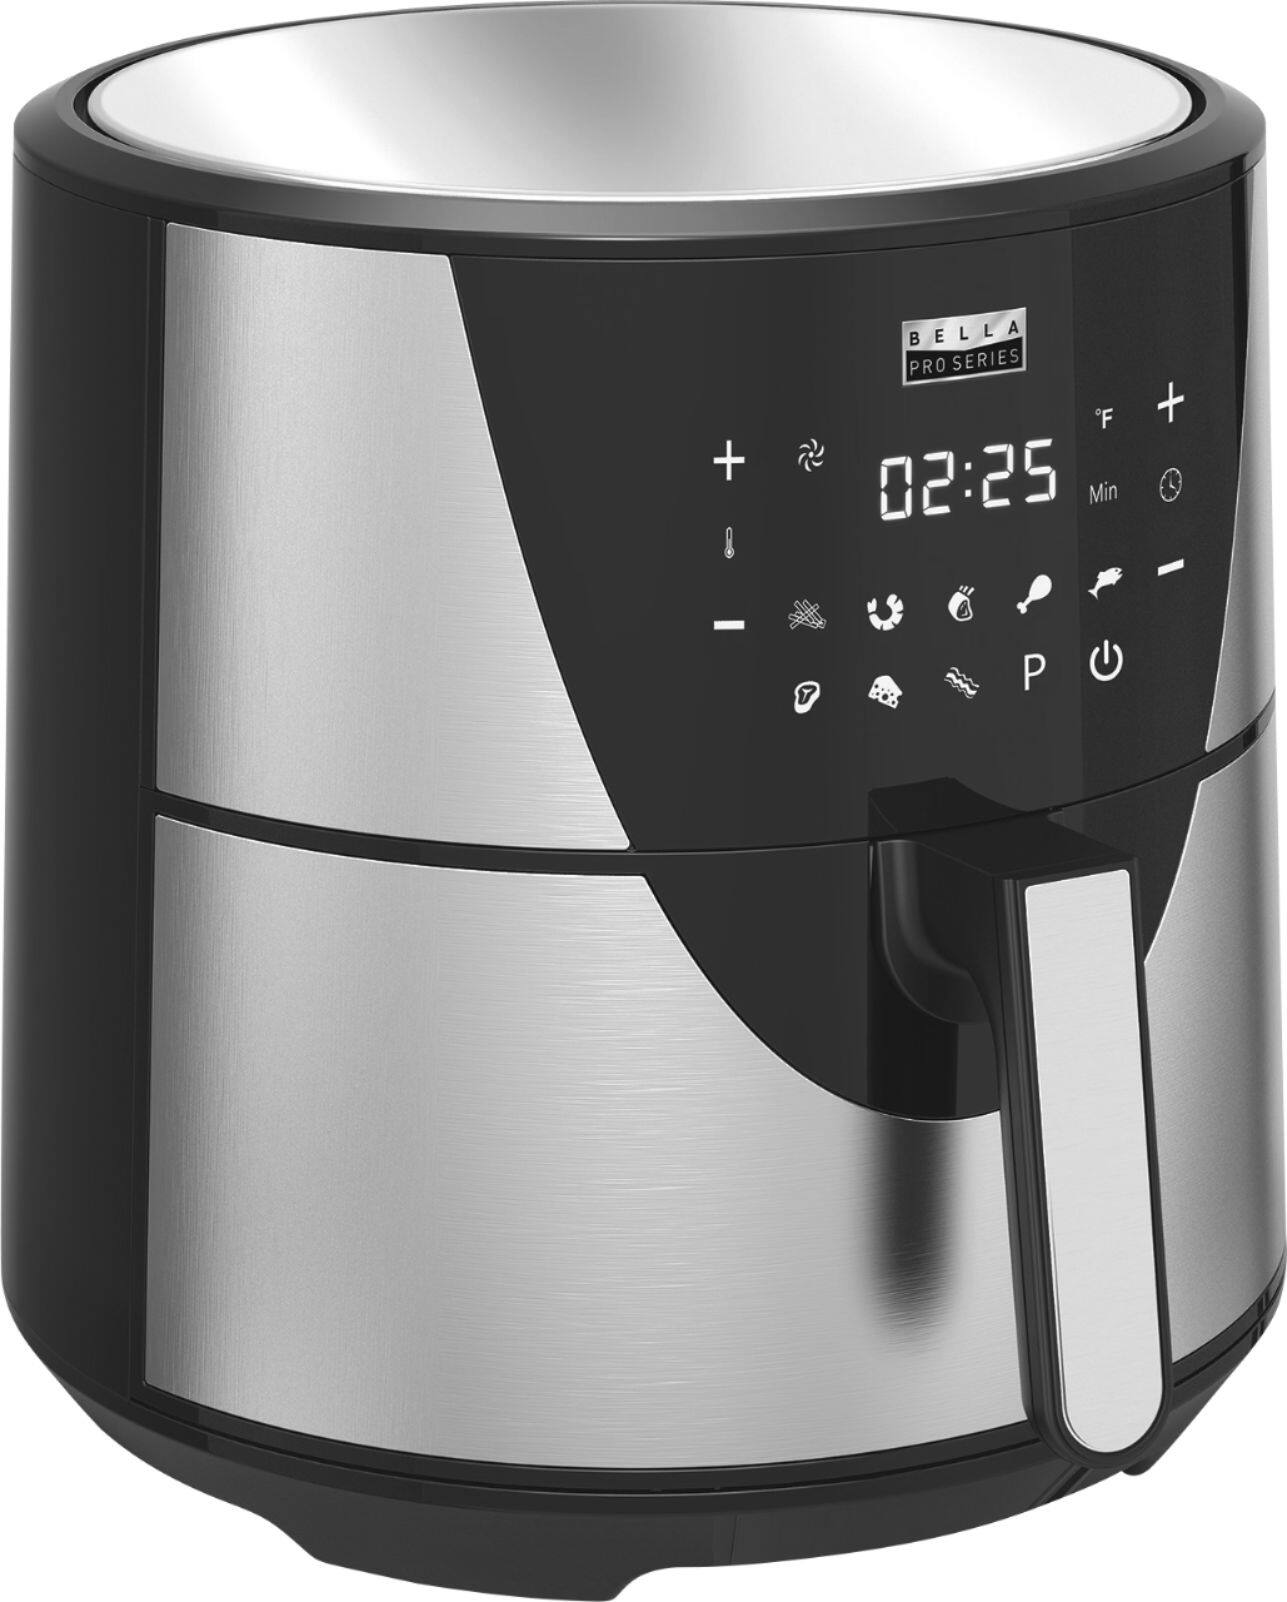 8-Quart Bella Pro Series Touchscreen Air Fryer (Stainless Steel) $50 + Free S/H